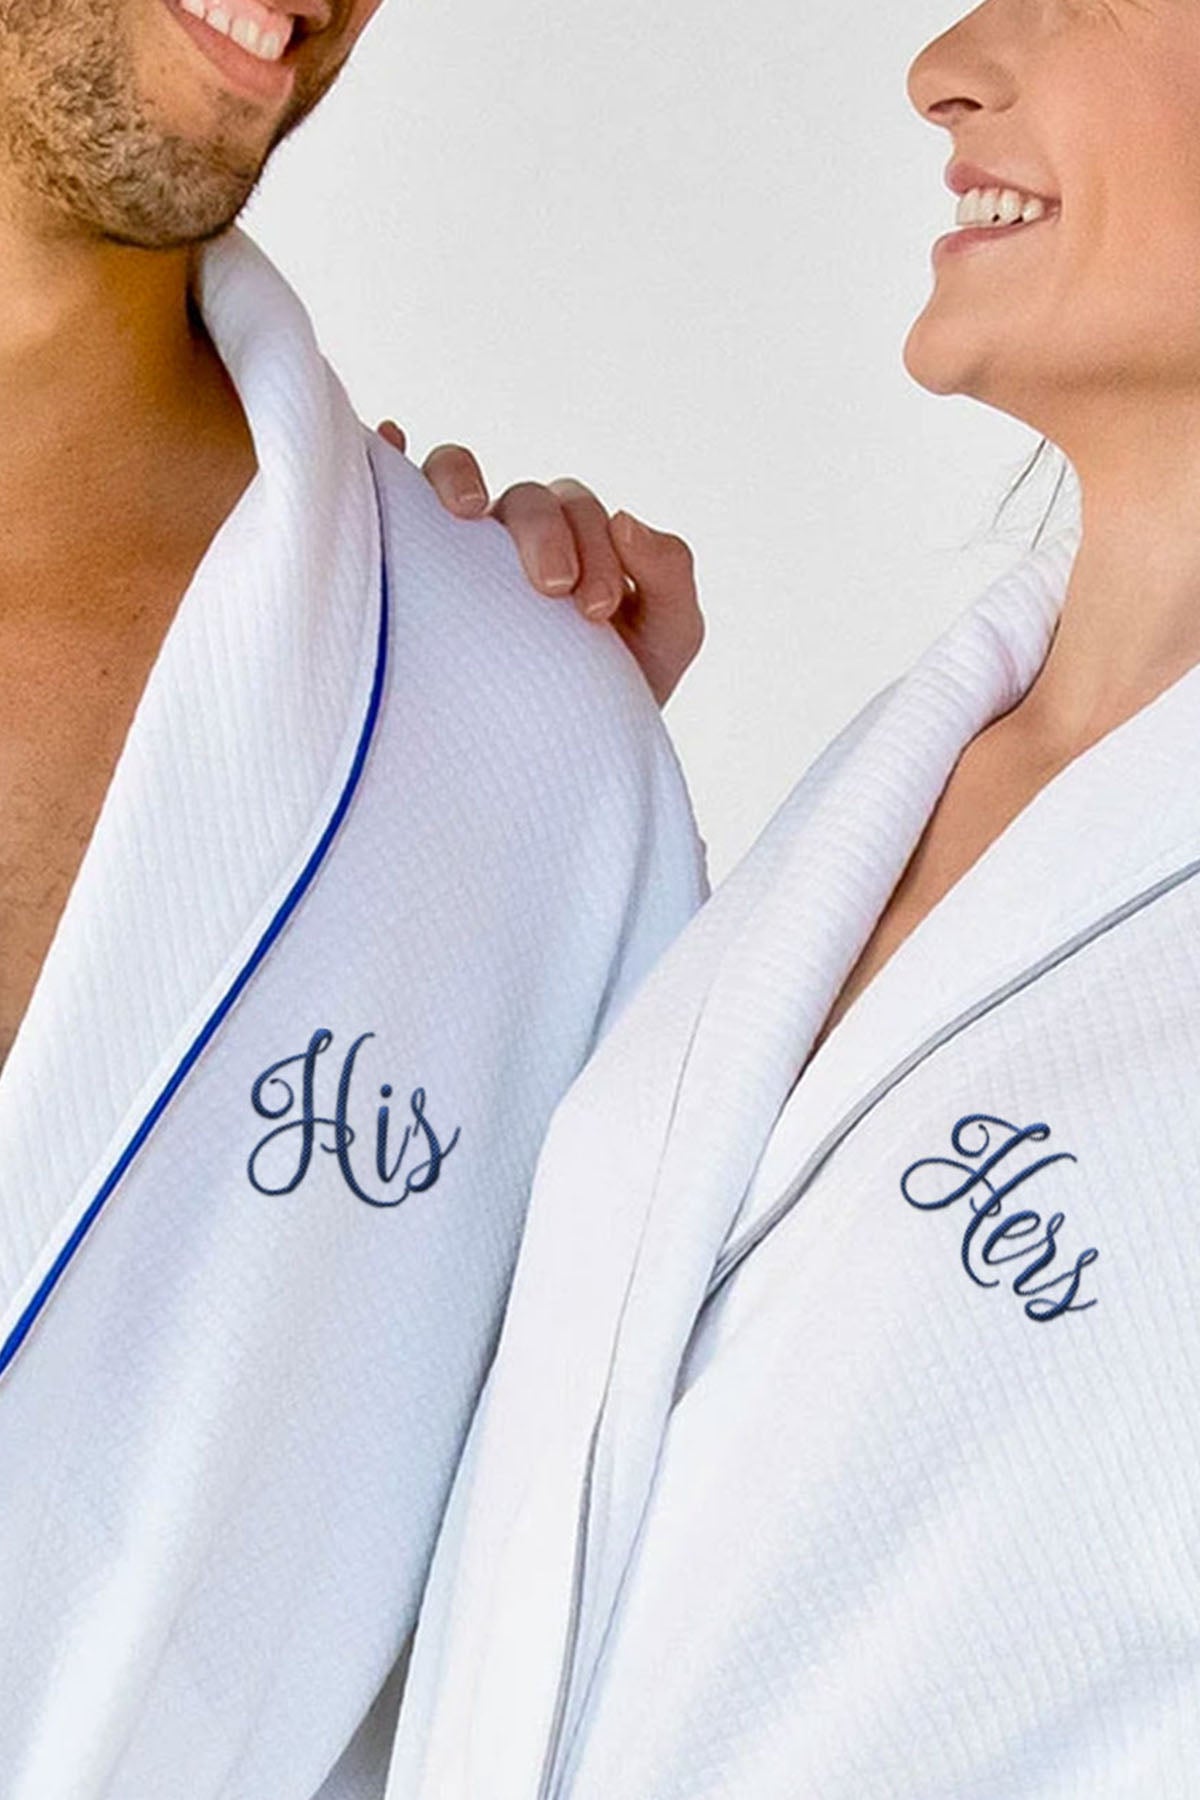 His Hers Grid Style Bath Robe White